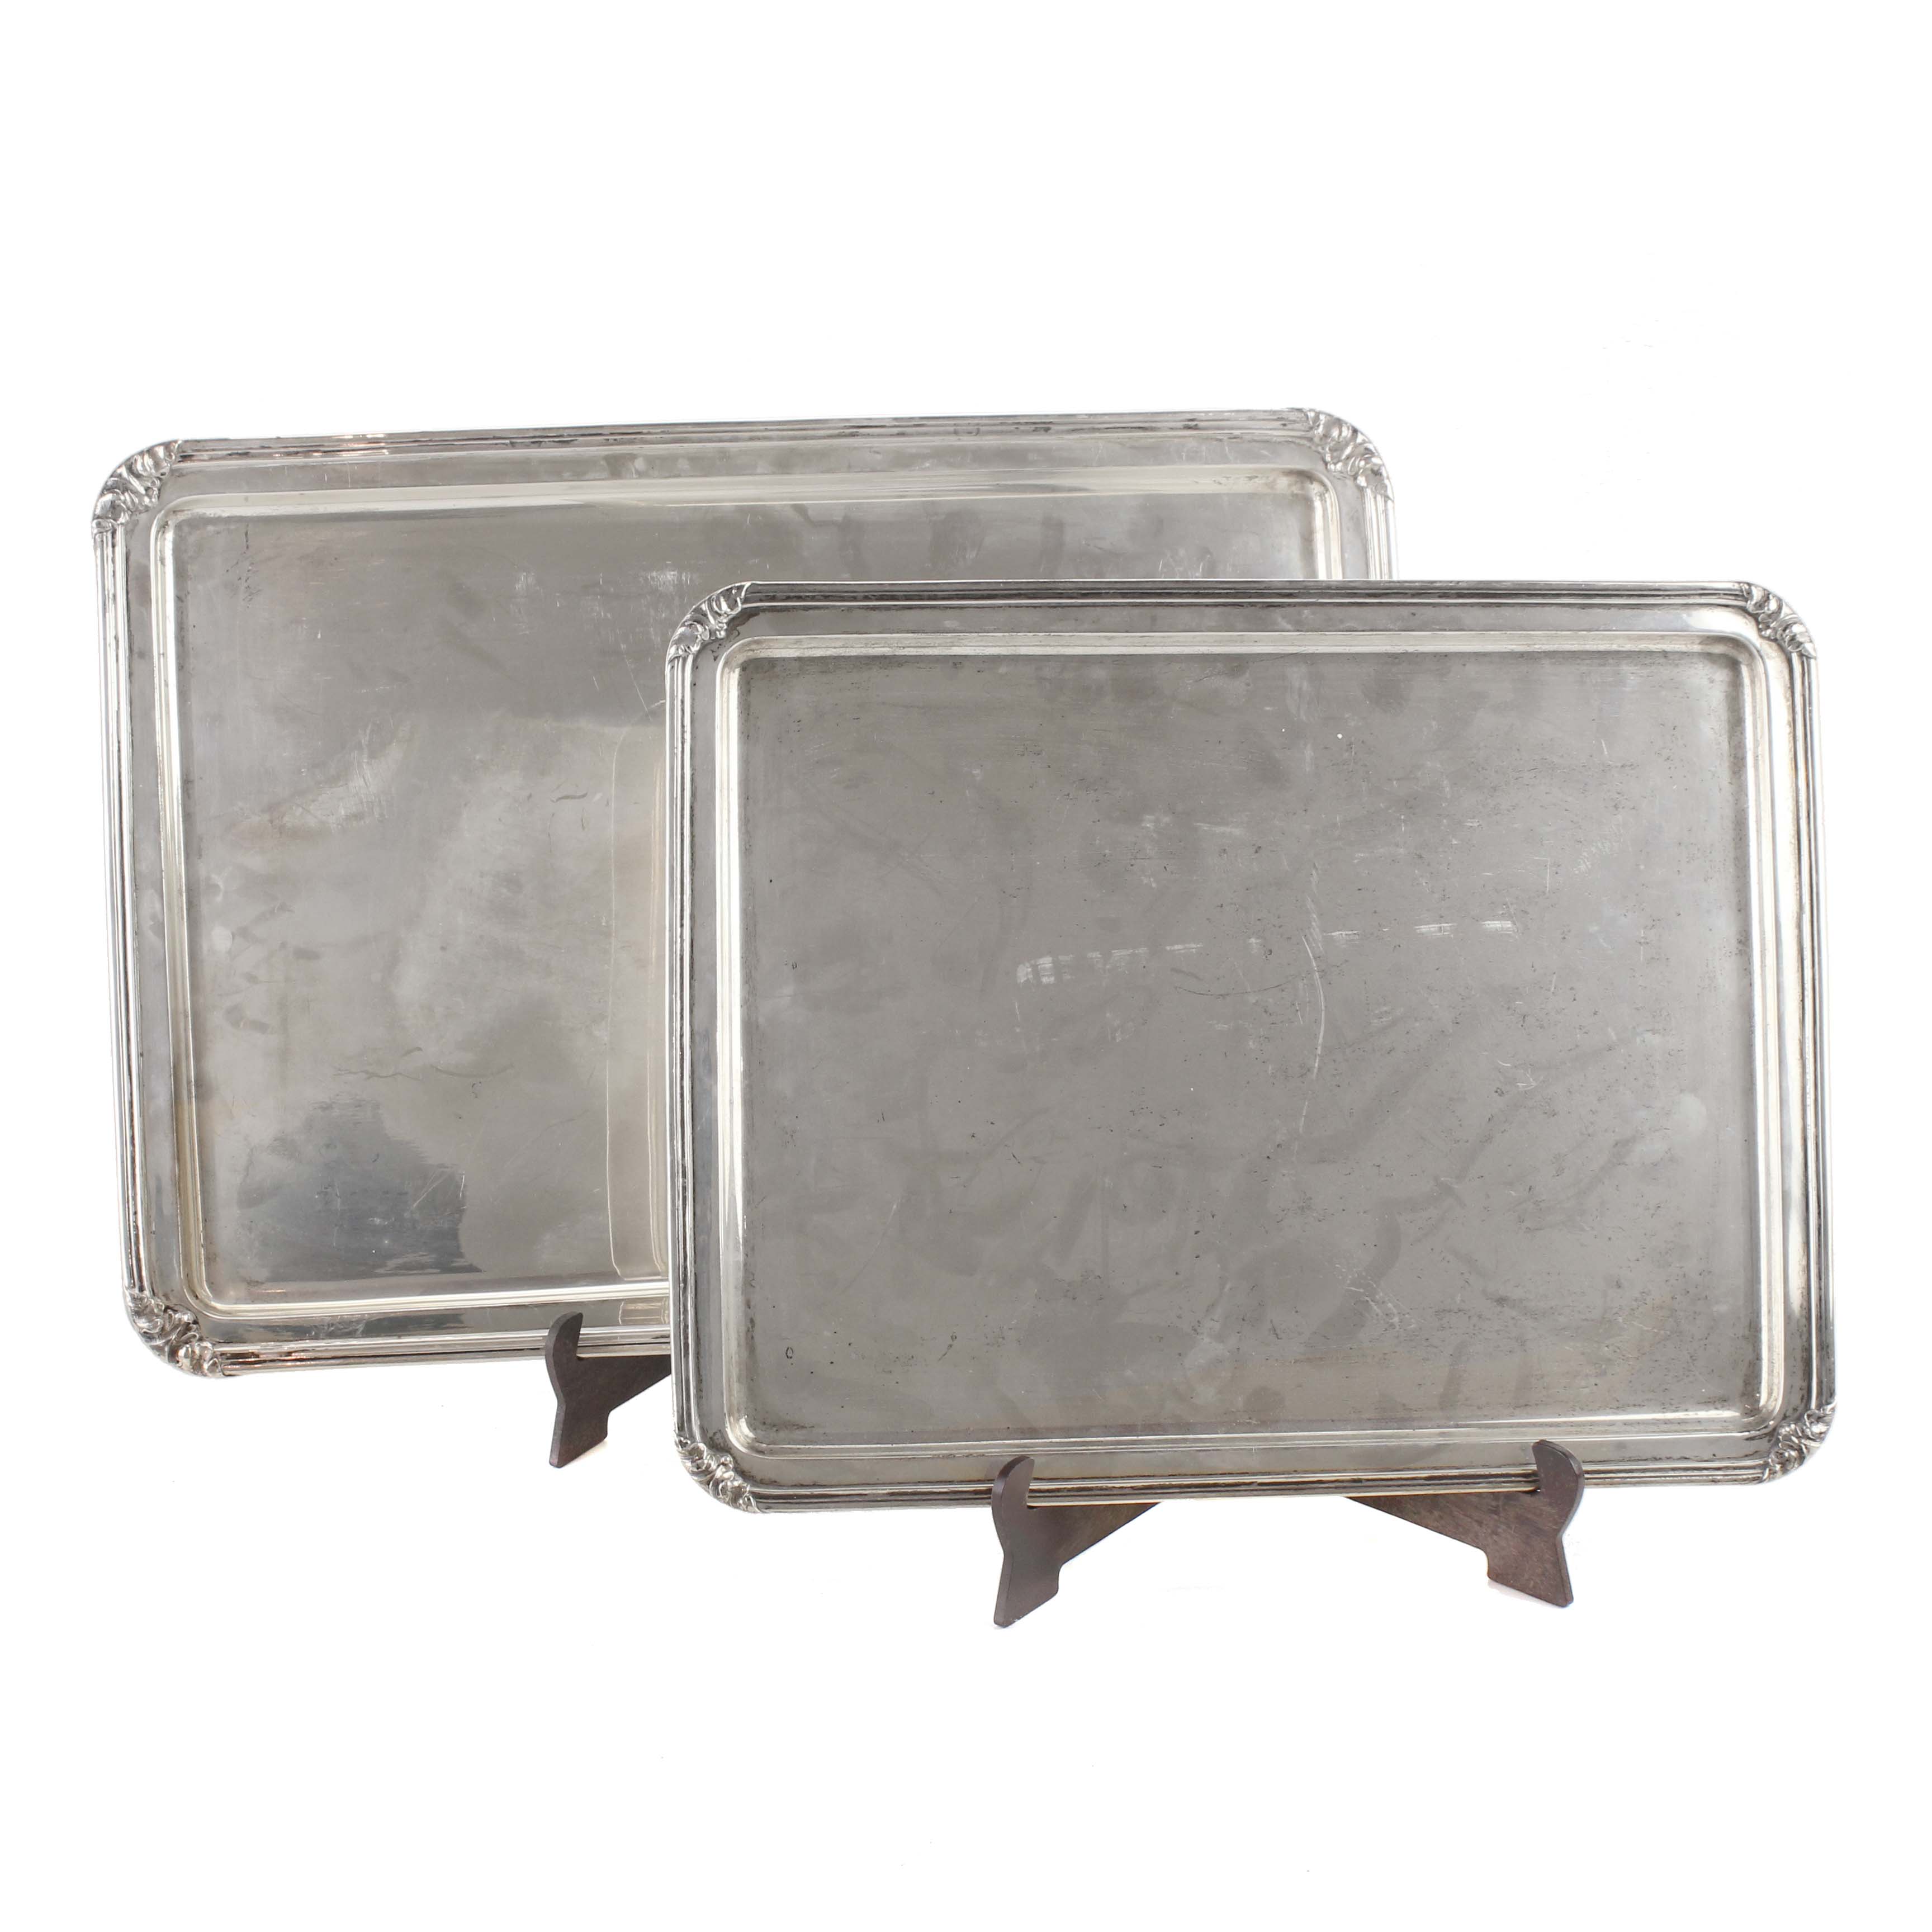 PAIR OF SILVER BARCELONA TRAYS, MID C20th.